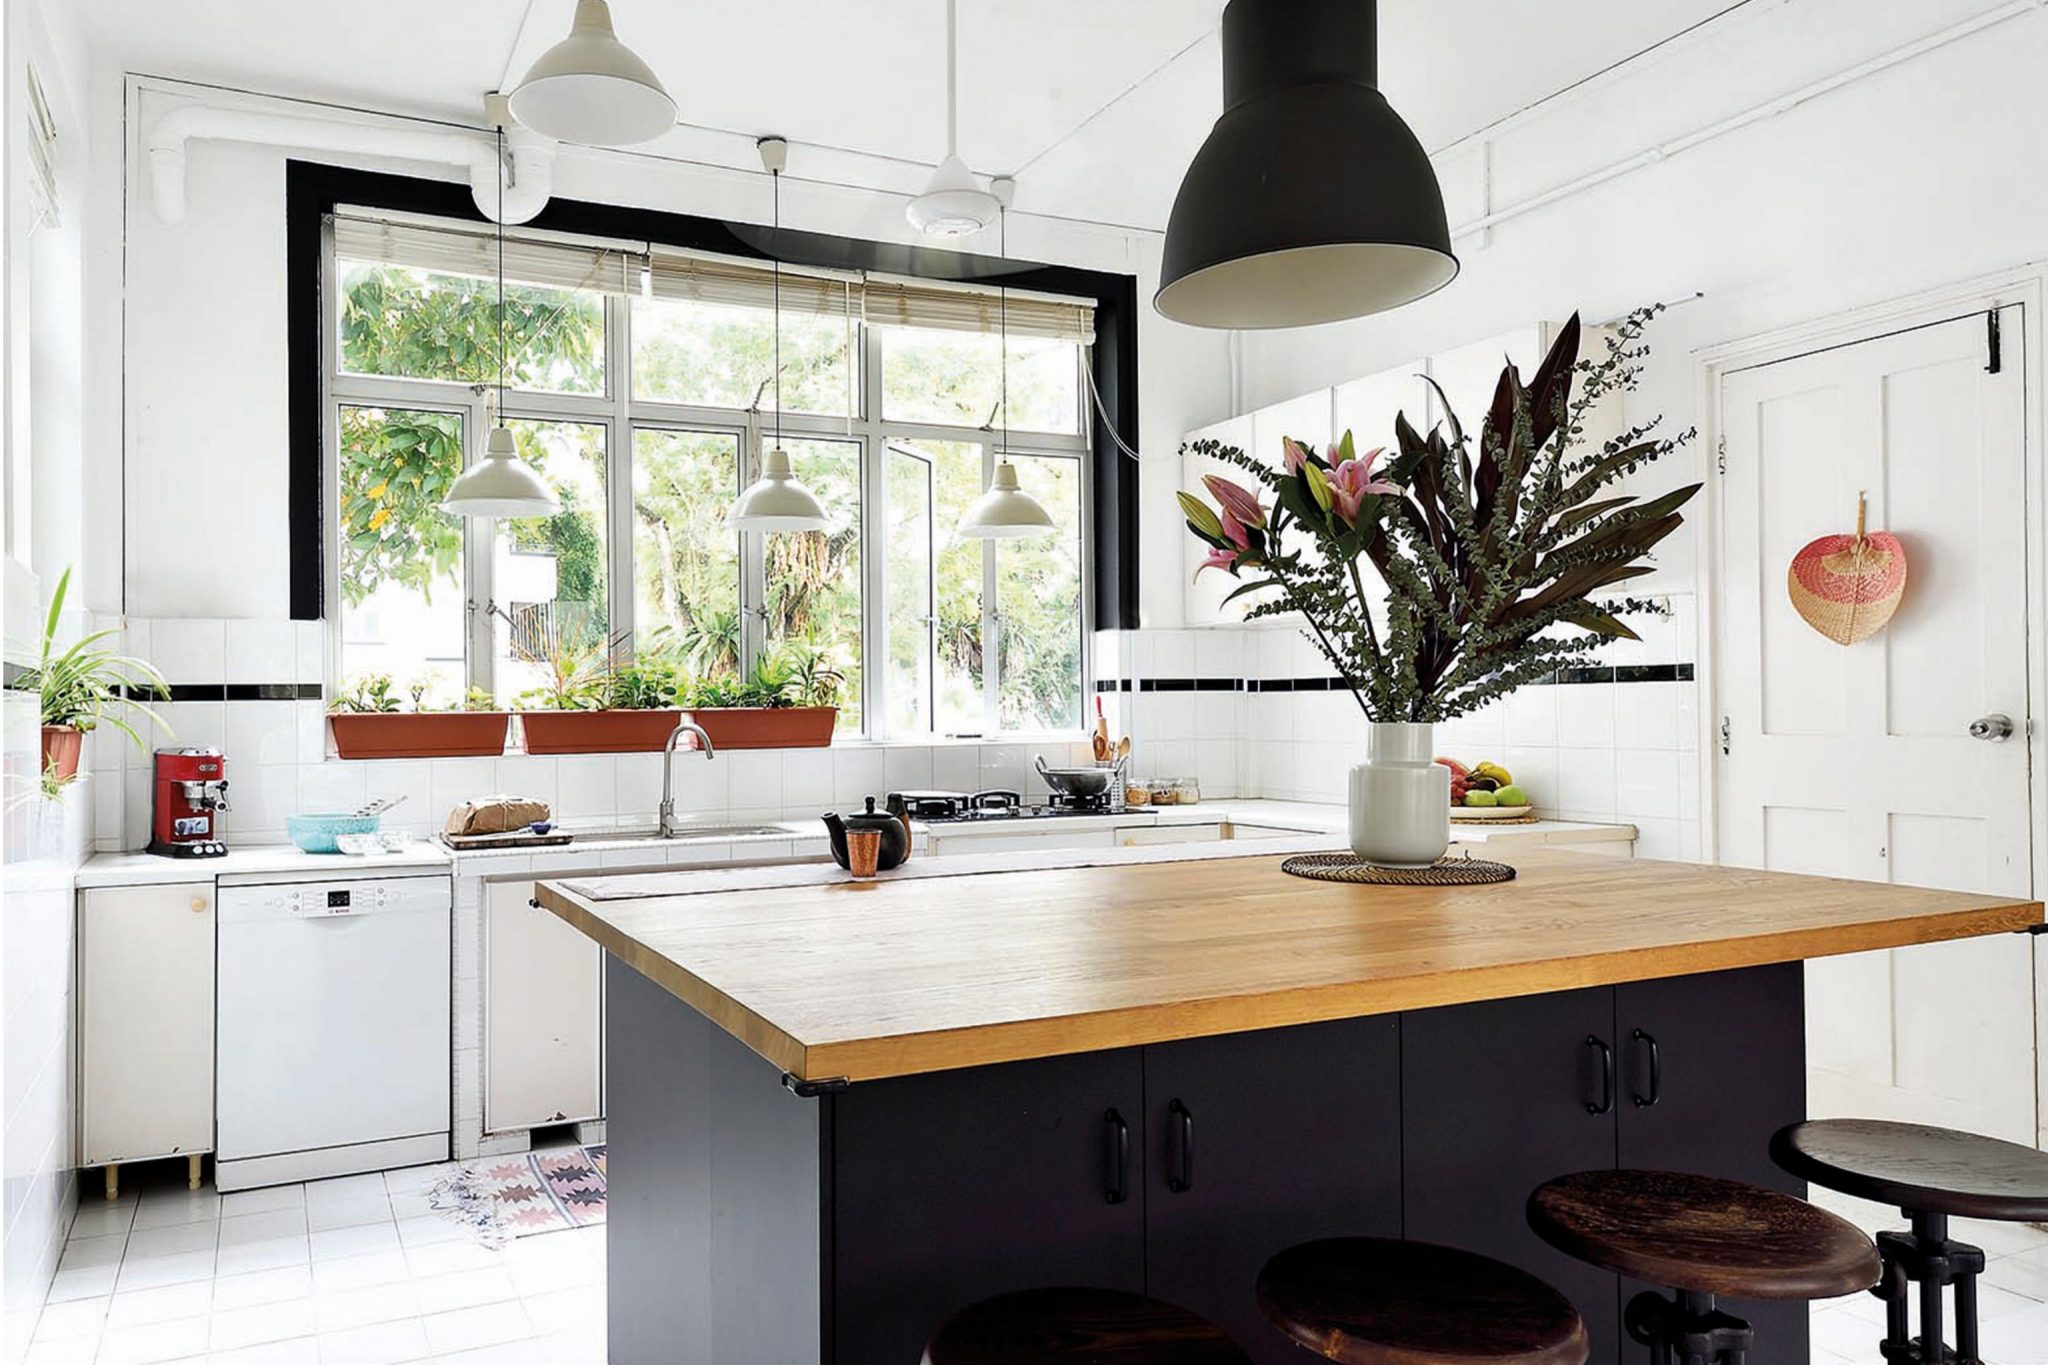 The Chic Home: Creature comforts in 100-year-old black-and-white home